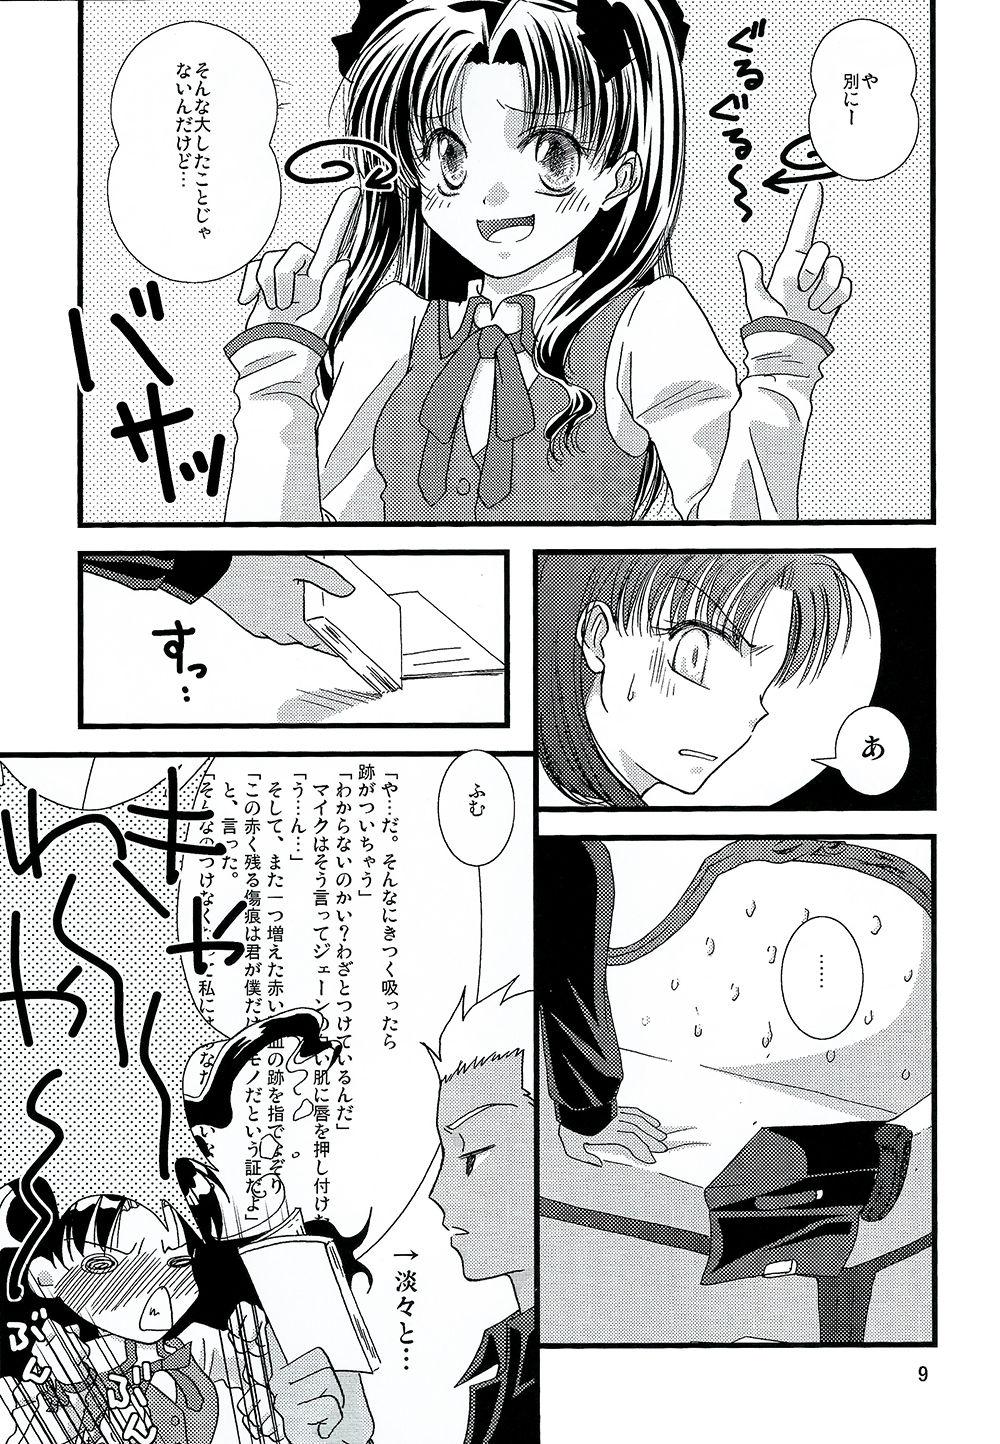 Boobs Kyuurinbon. The thing which remains - Fate stay night 8teen - Page 6